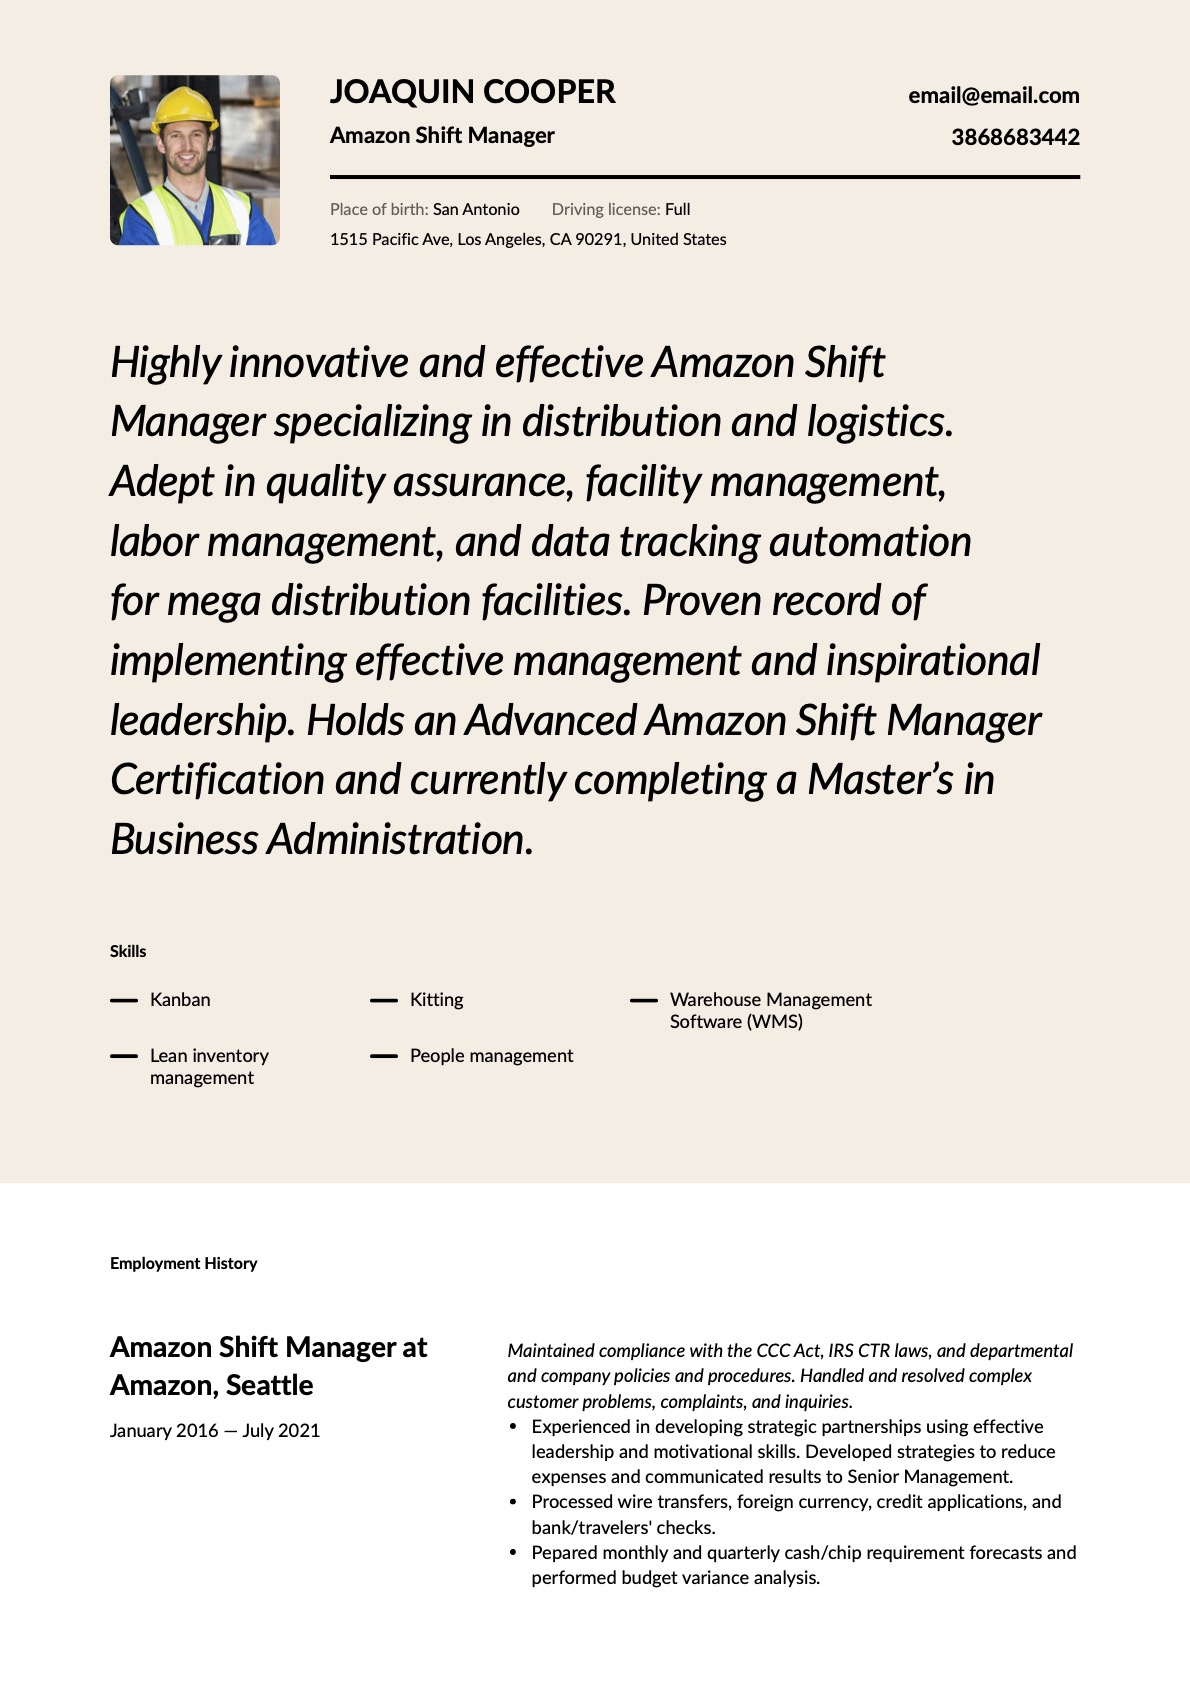 Modern Amazon Shift Manager Resume Template